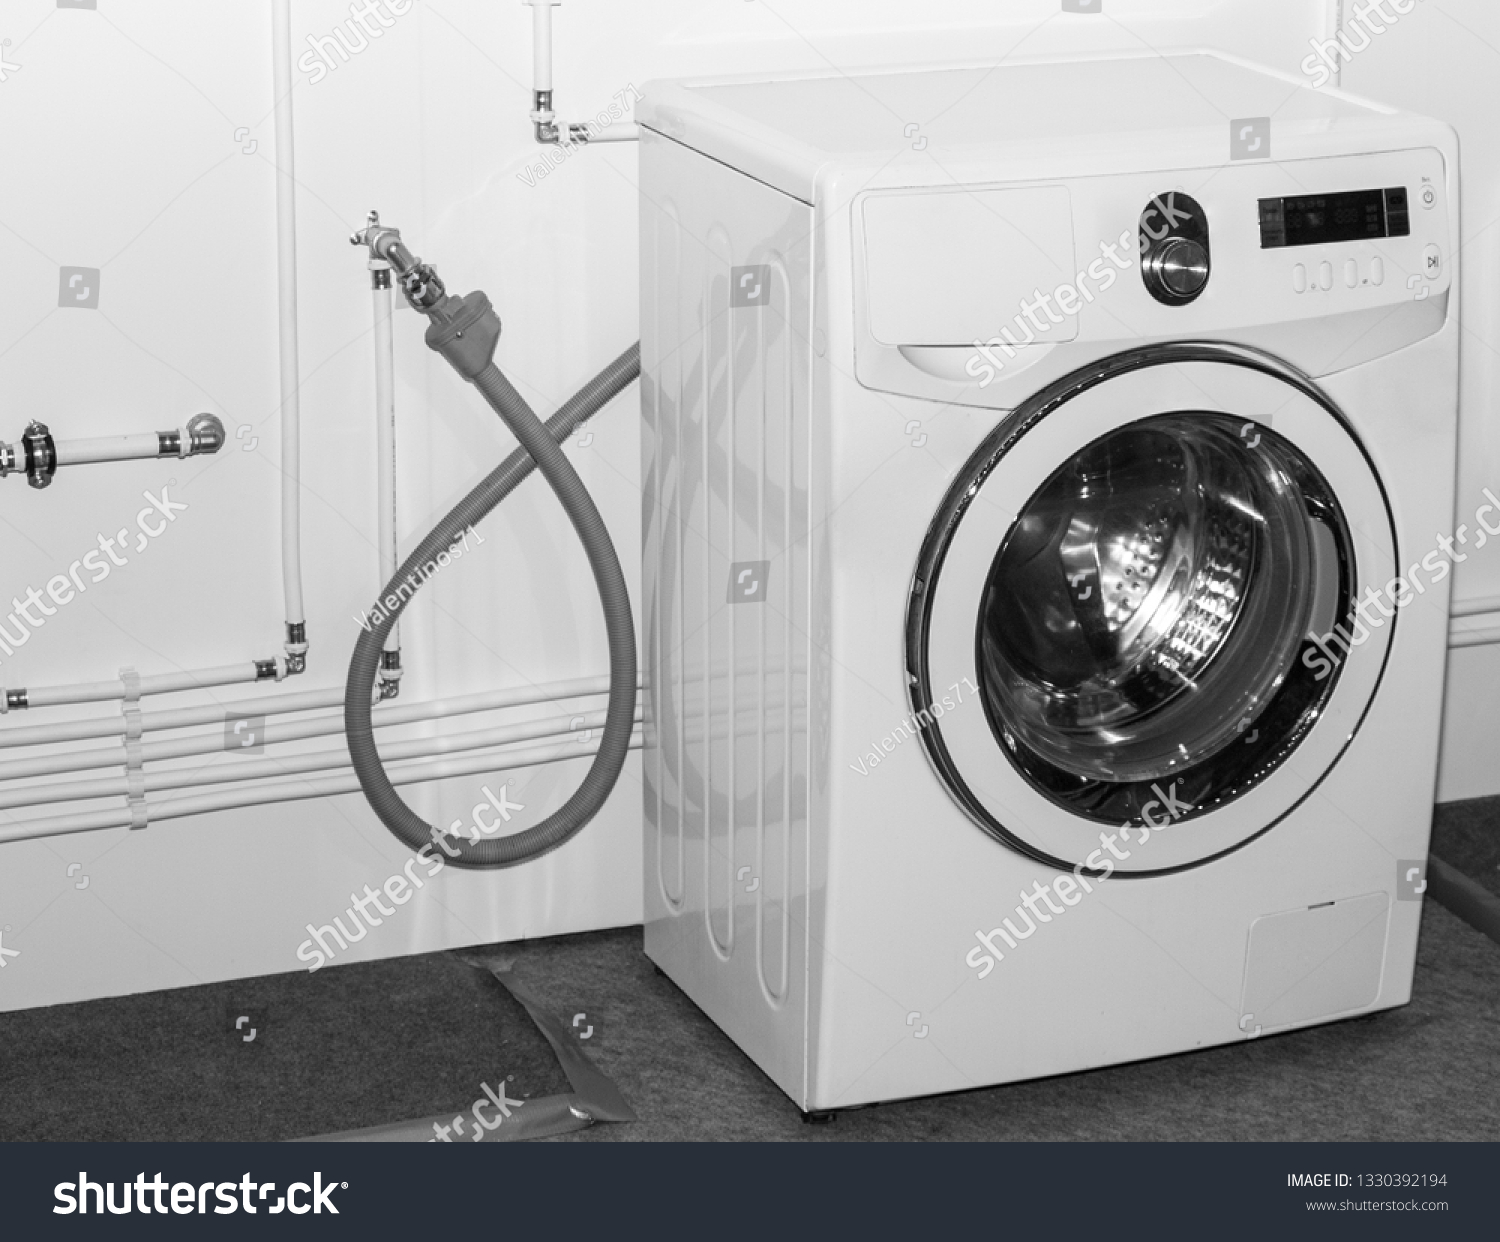 Stock Photo White Washing Machine Connected To Water Pipes 1330392194 